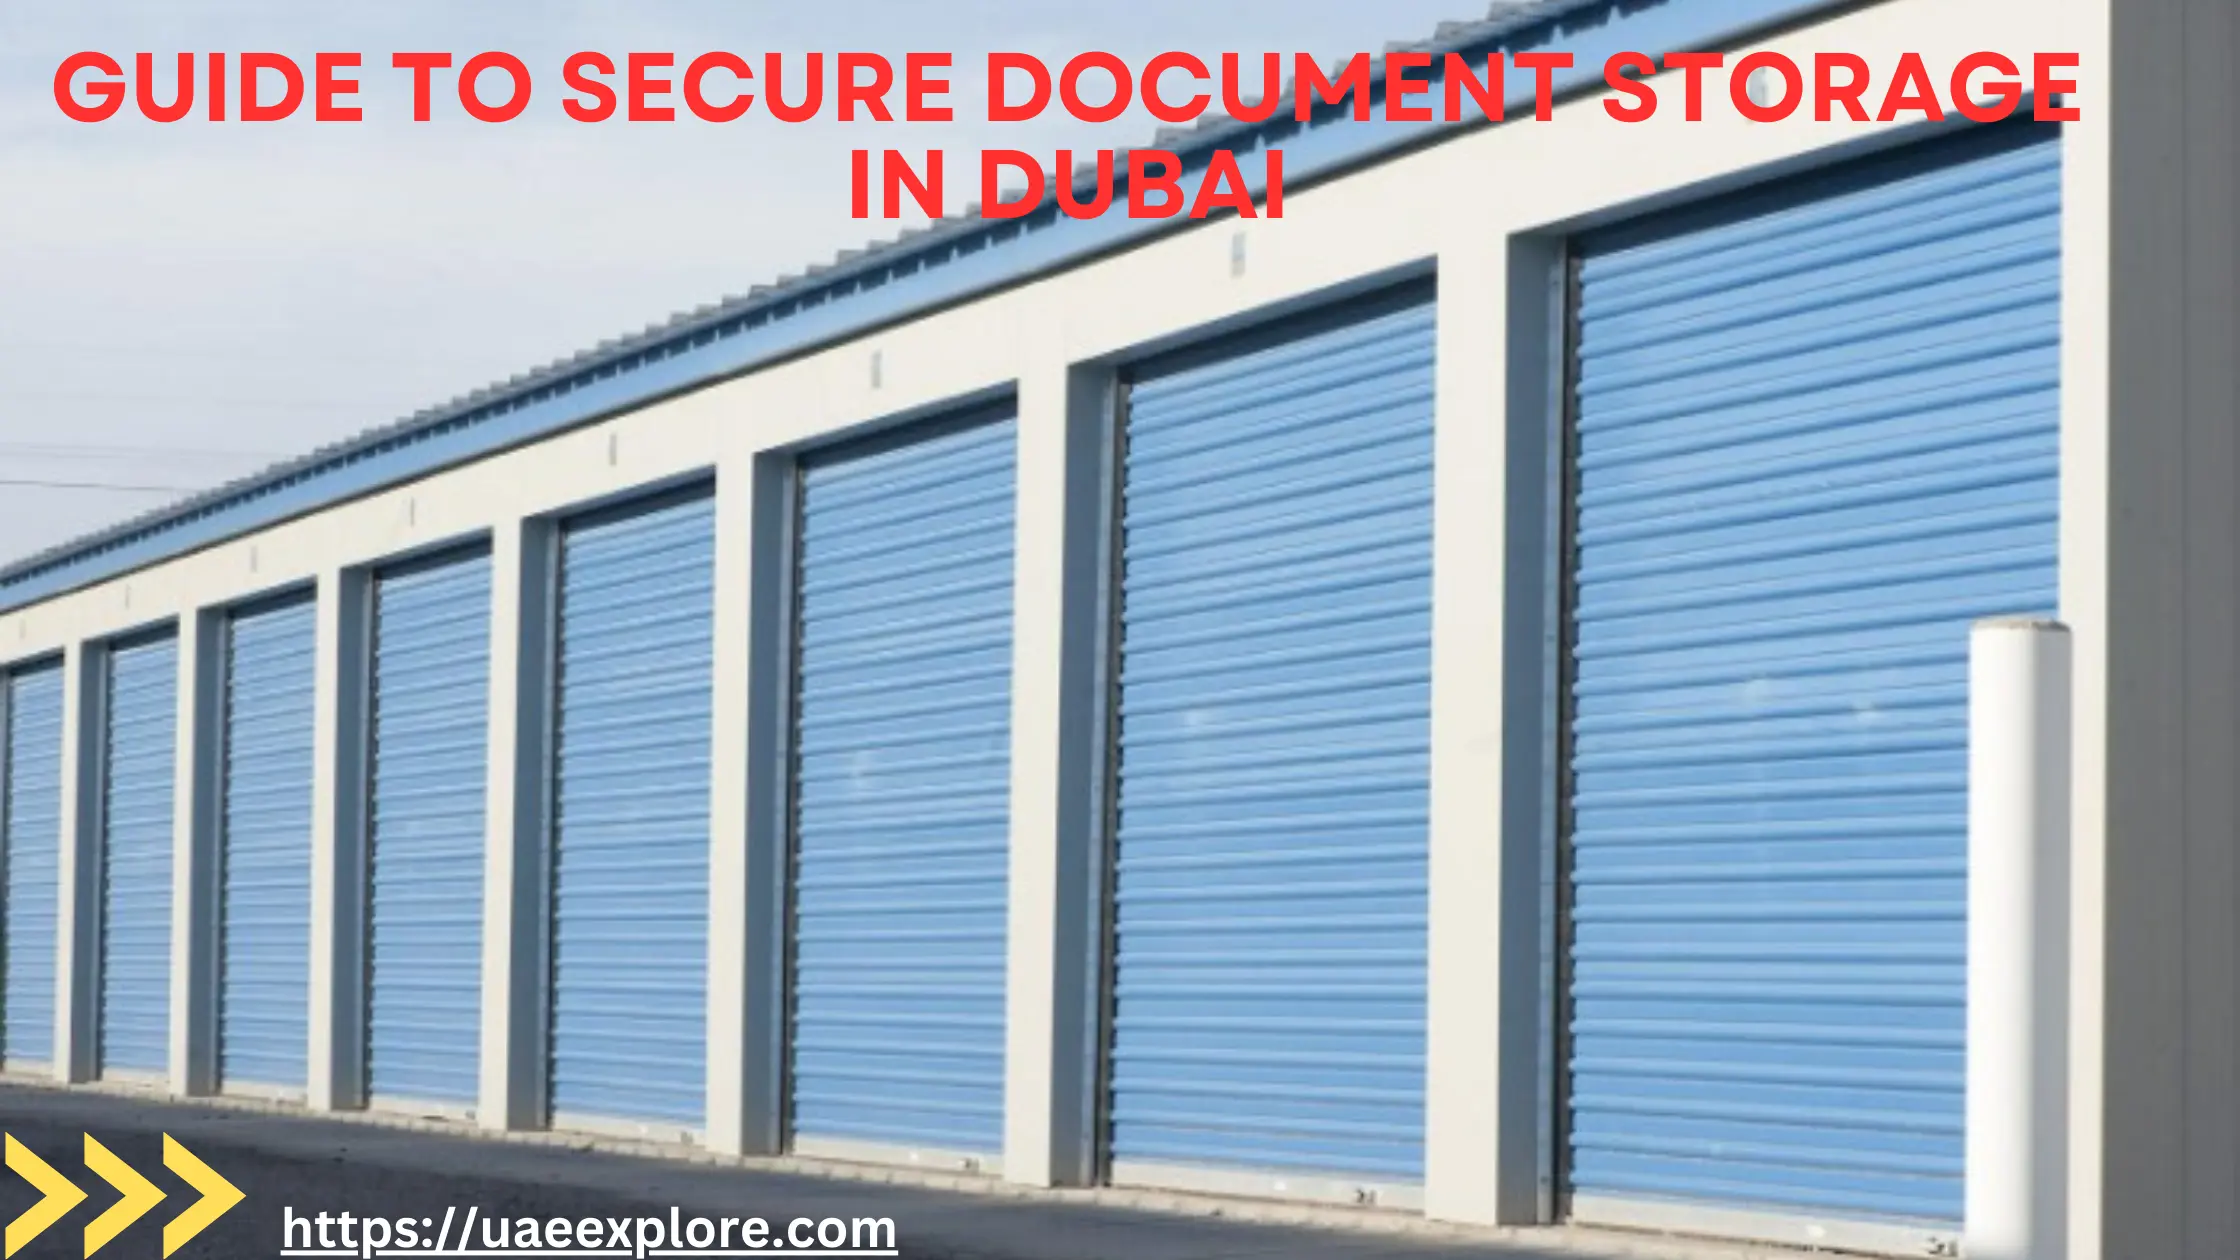 Guide to Secure Document Storage in Dubai